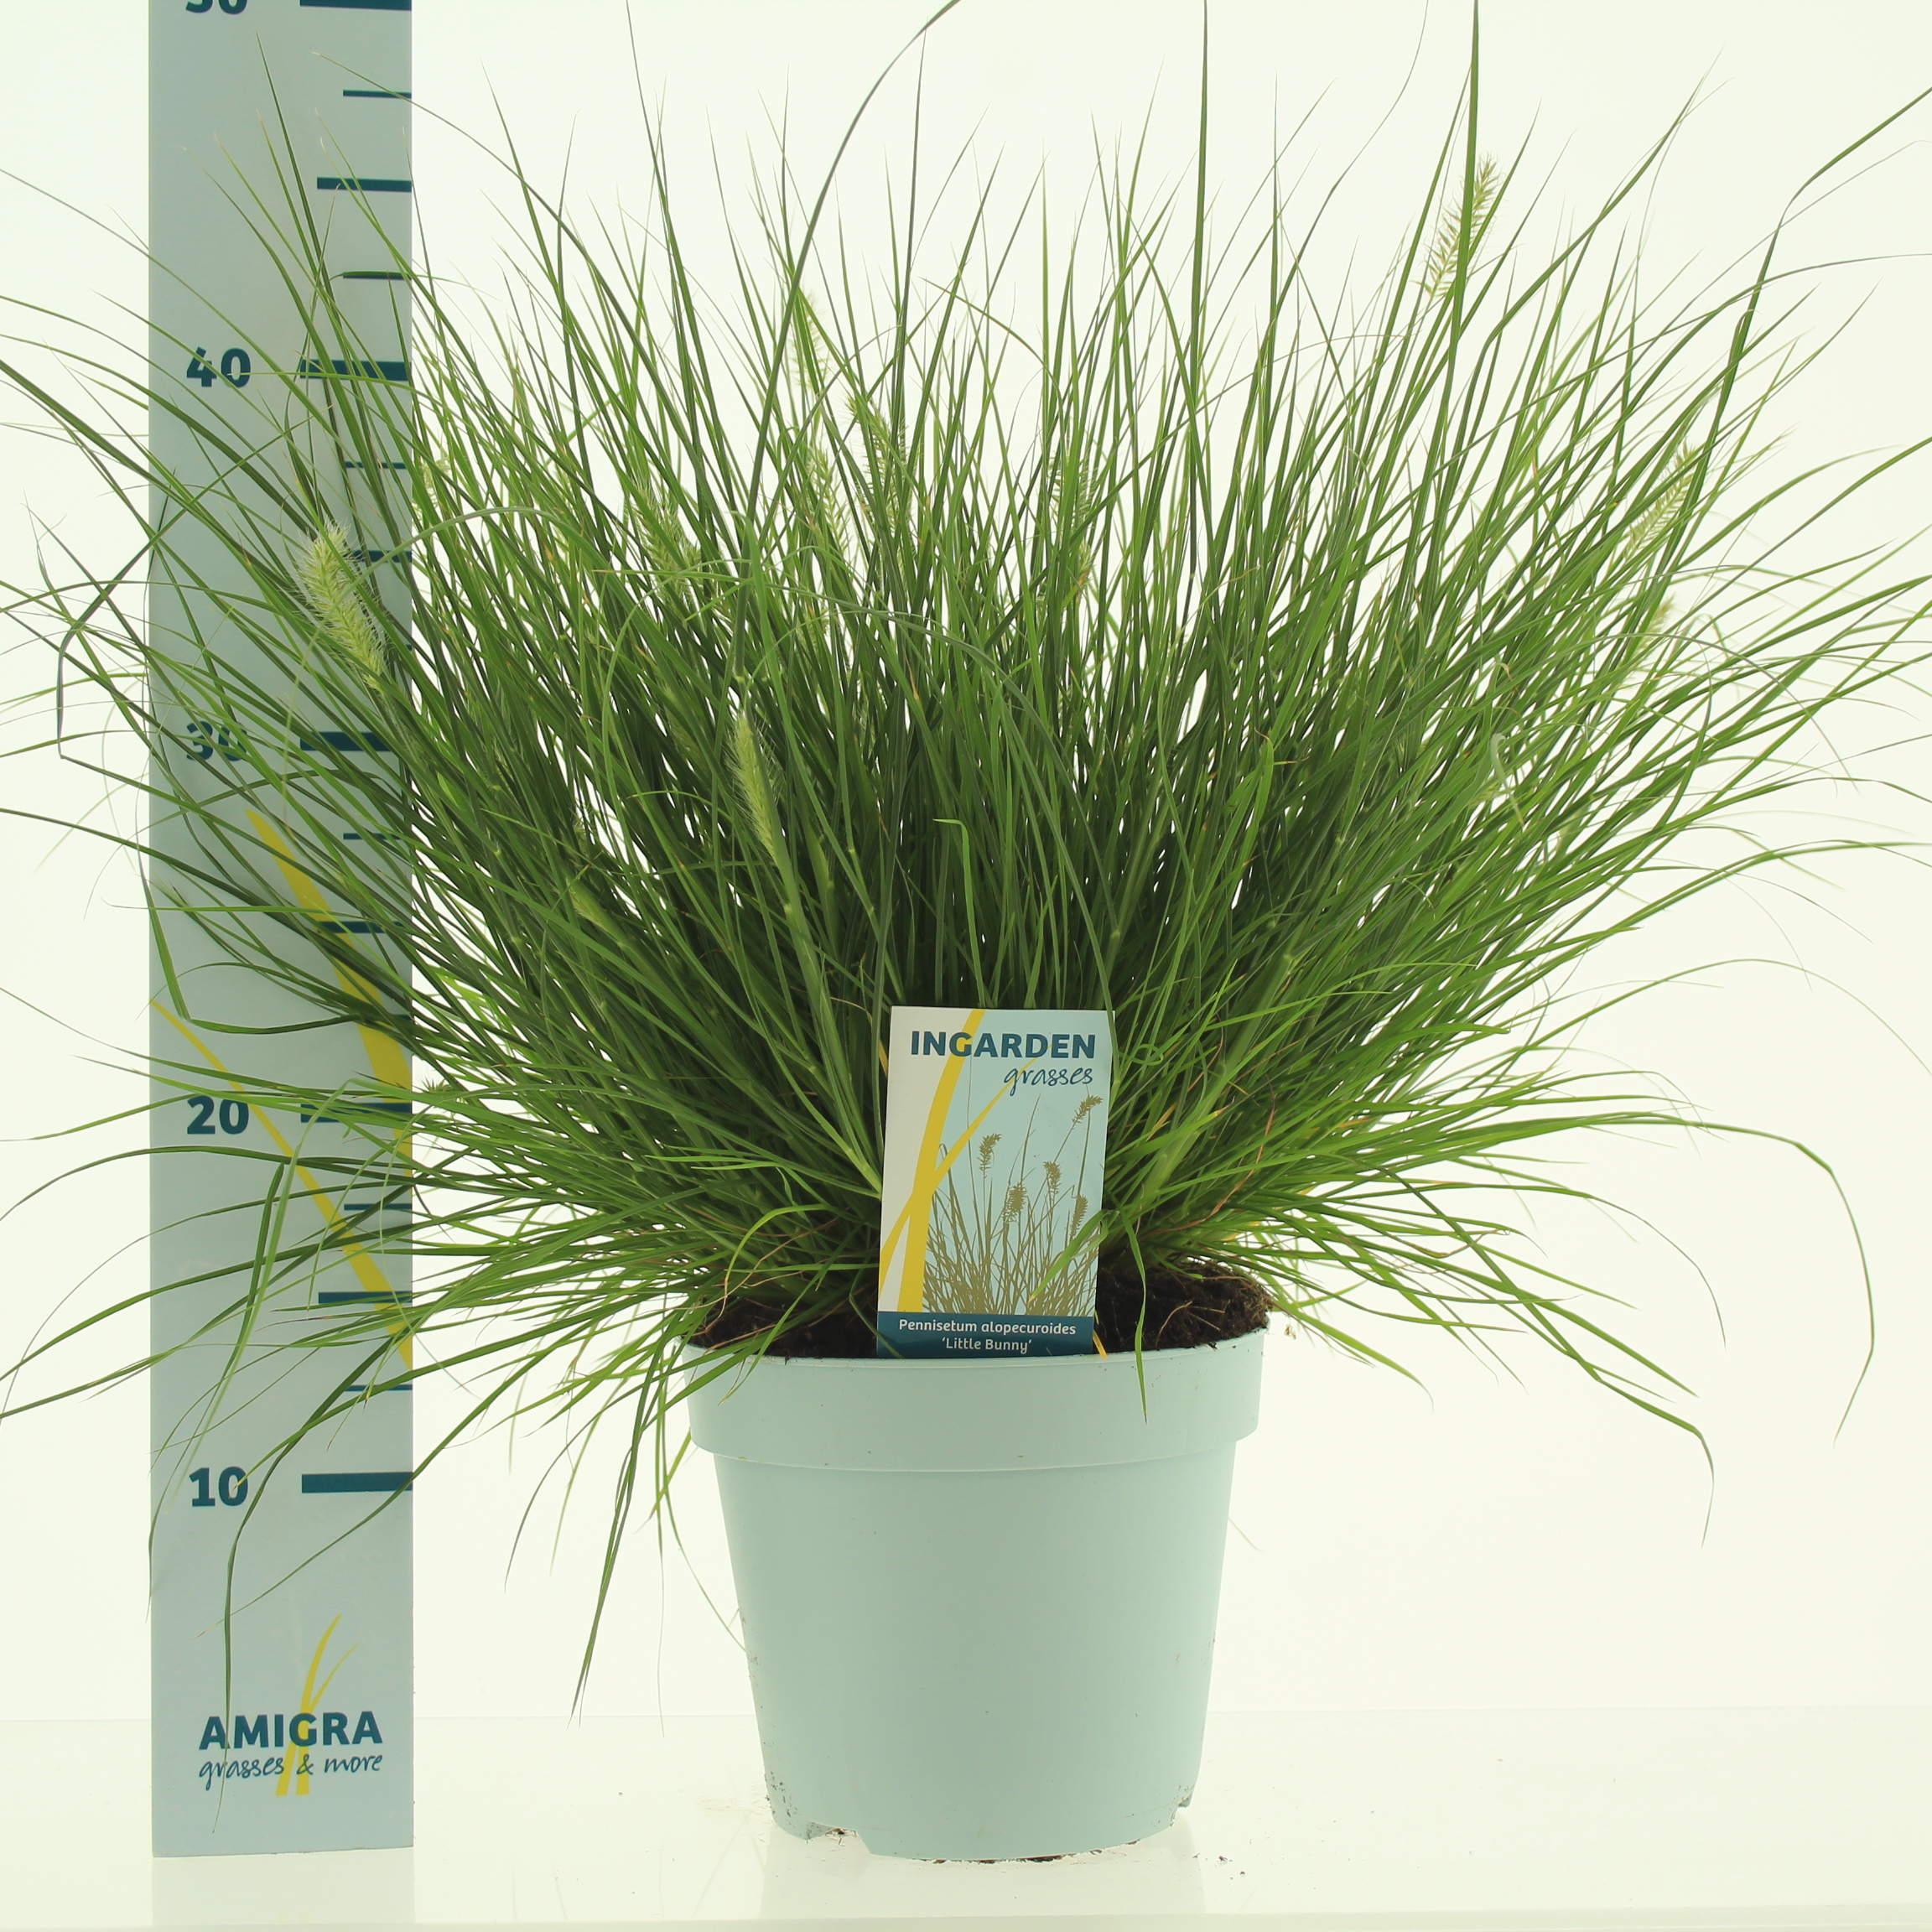 Picture of Pennisetum alopecuroides 'Little Bunny'